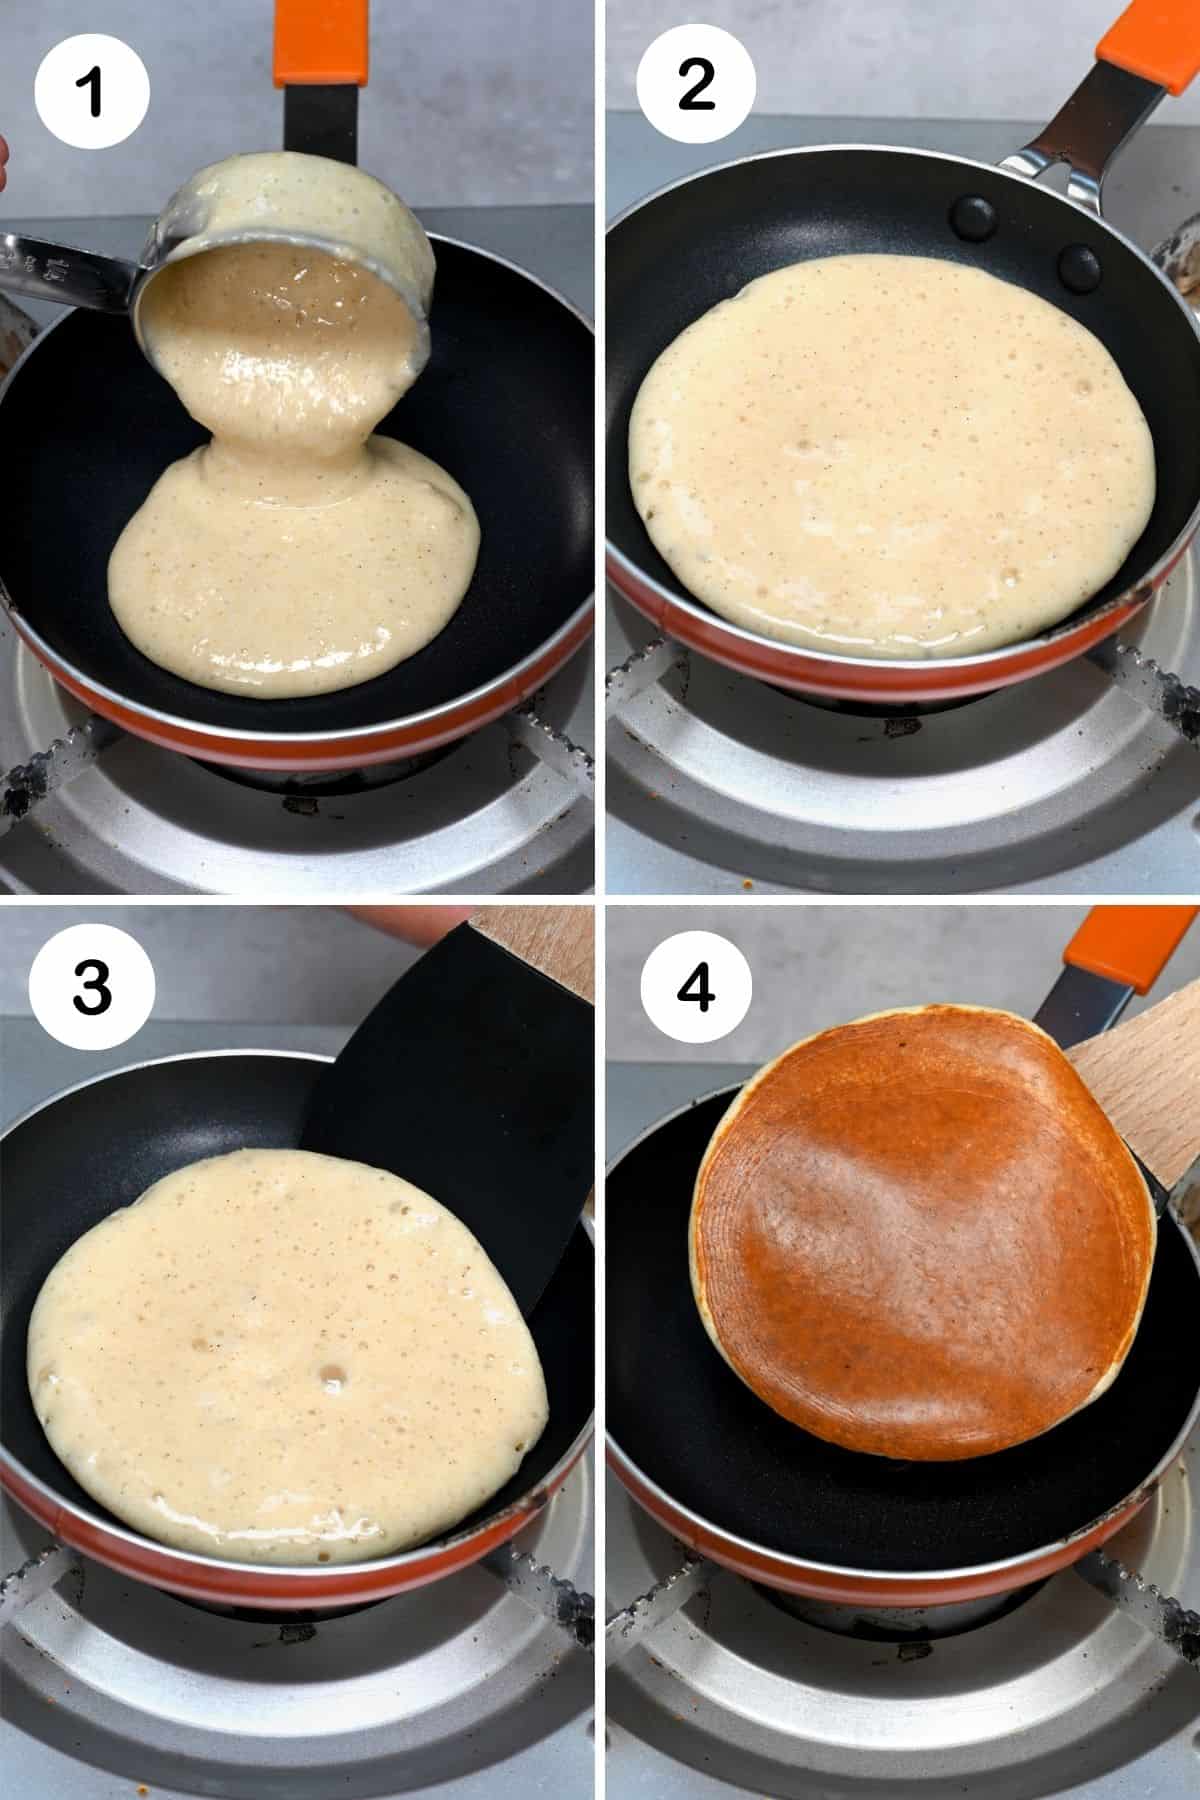 Making protein pancakes in a small pan